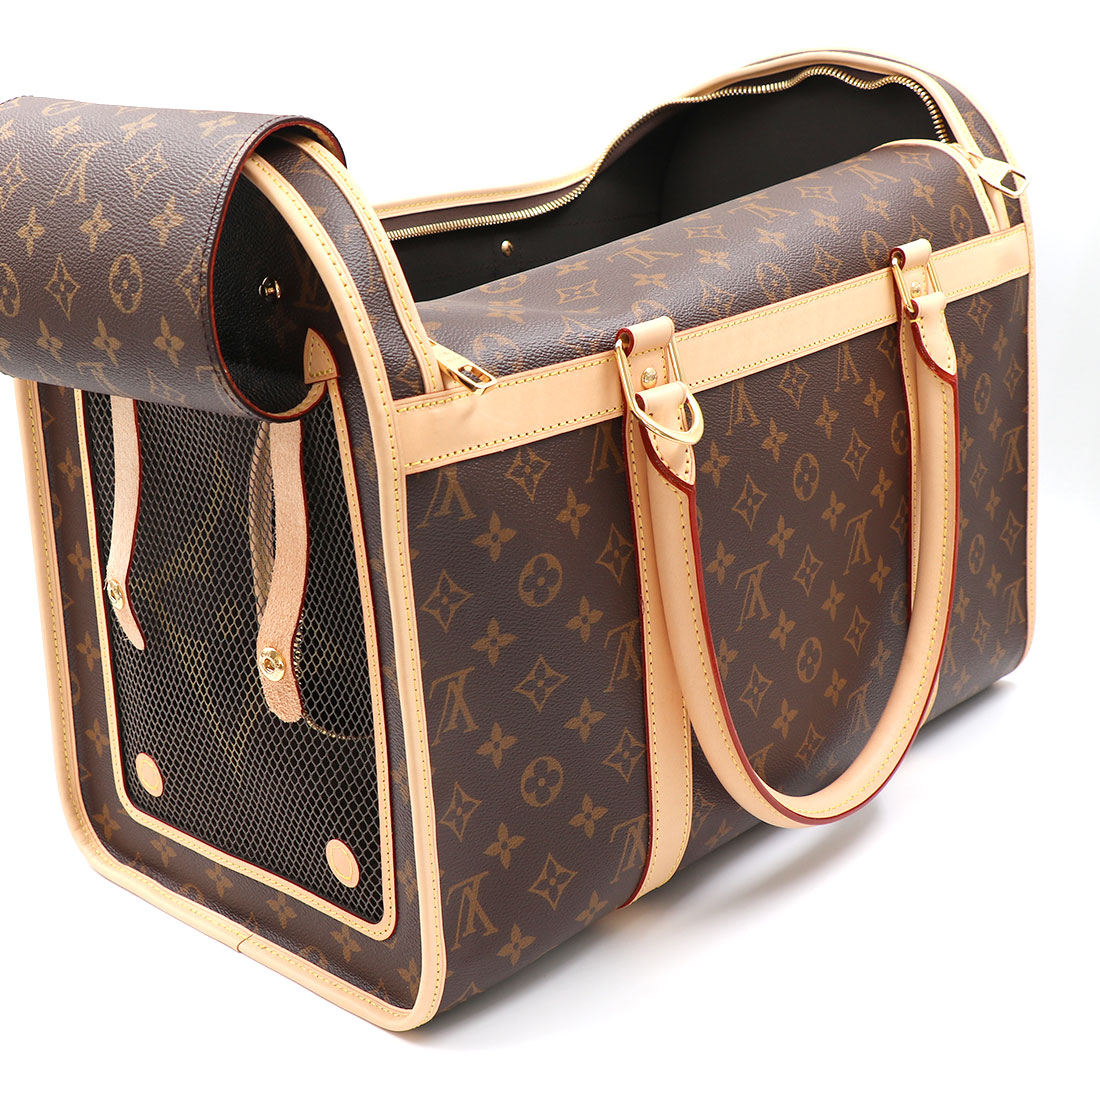 Louis Vuitton Dog Carrier 40 - 6 For Sale on 1stDibs  louis vuitton cat  carrier, louis vuitton carrier bag